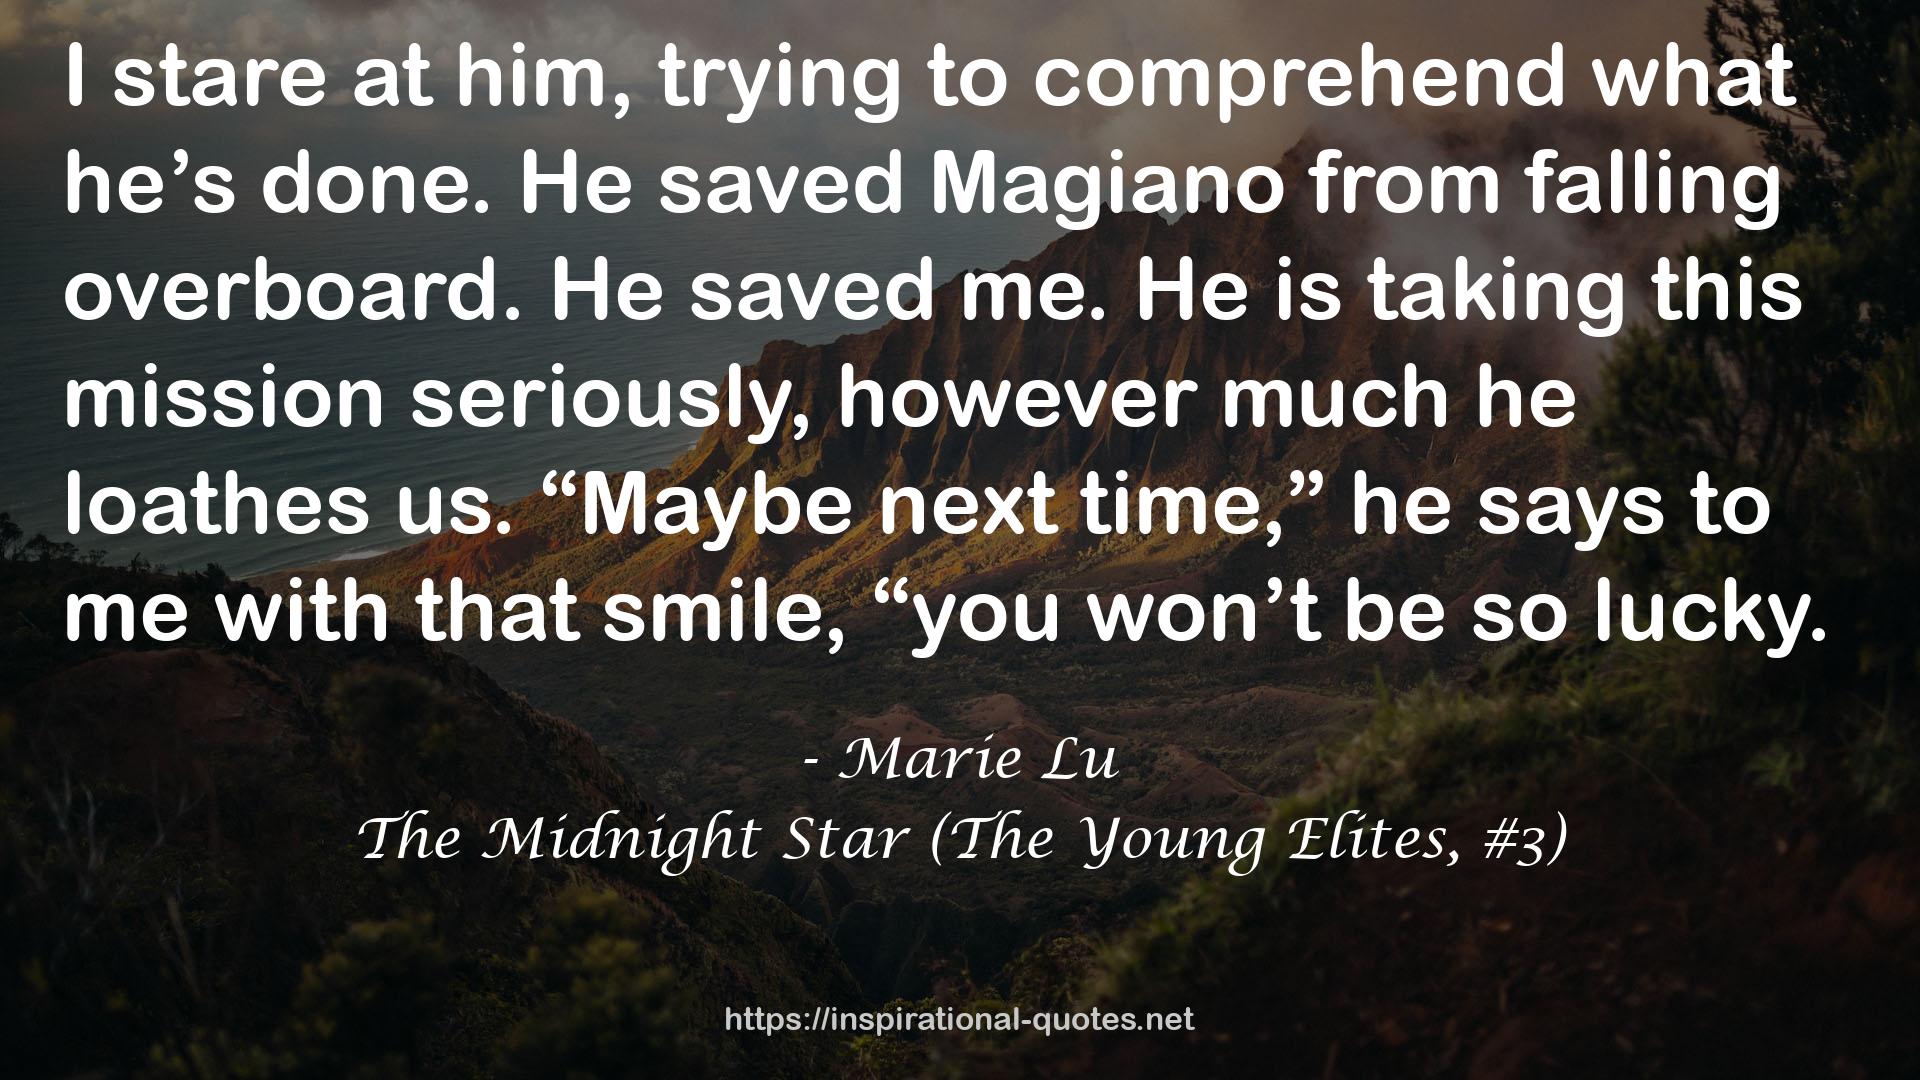 The Midnight Star (The Young Elites, #3) QUOTES